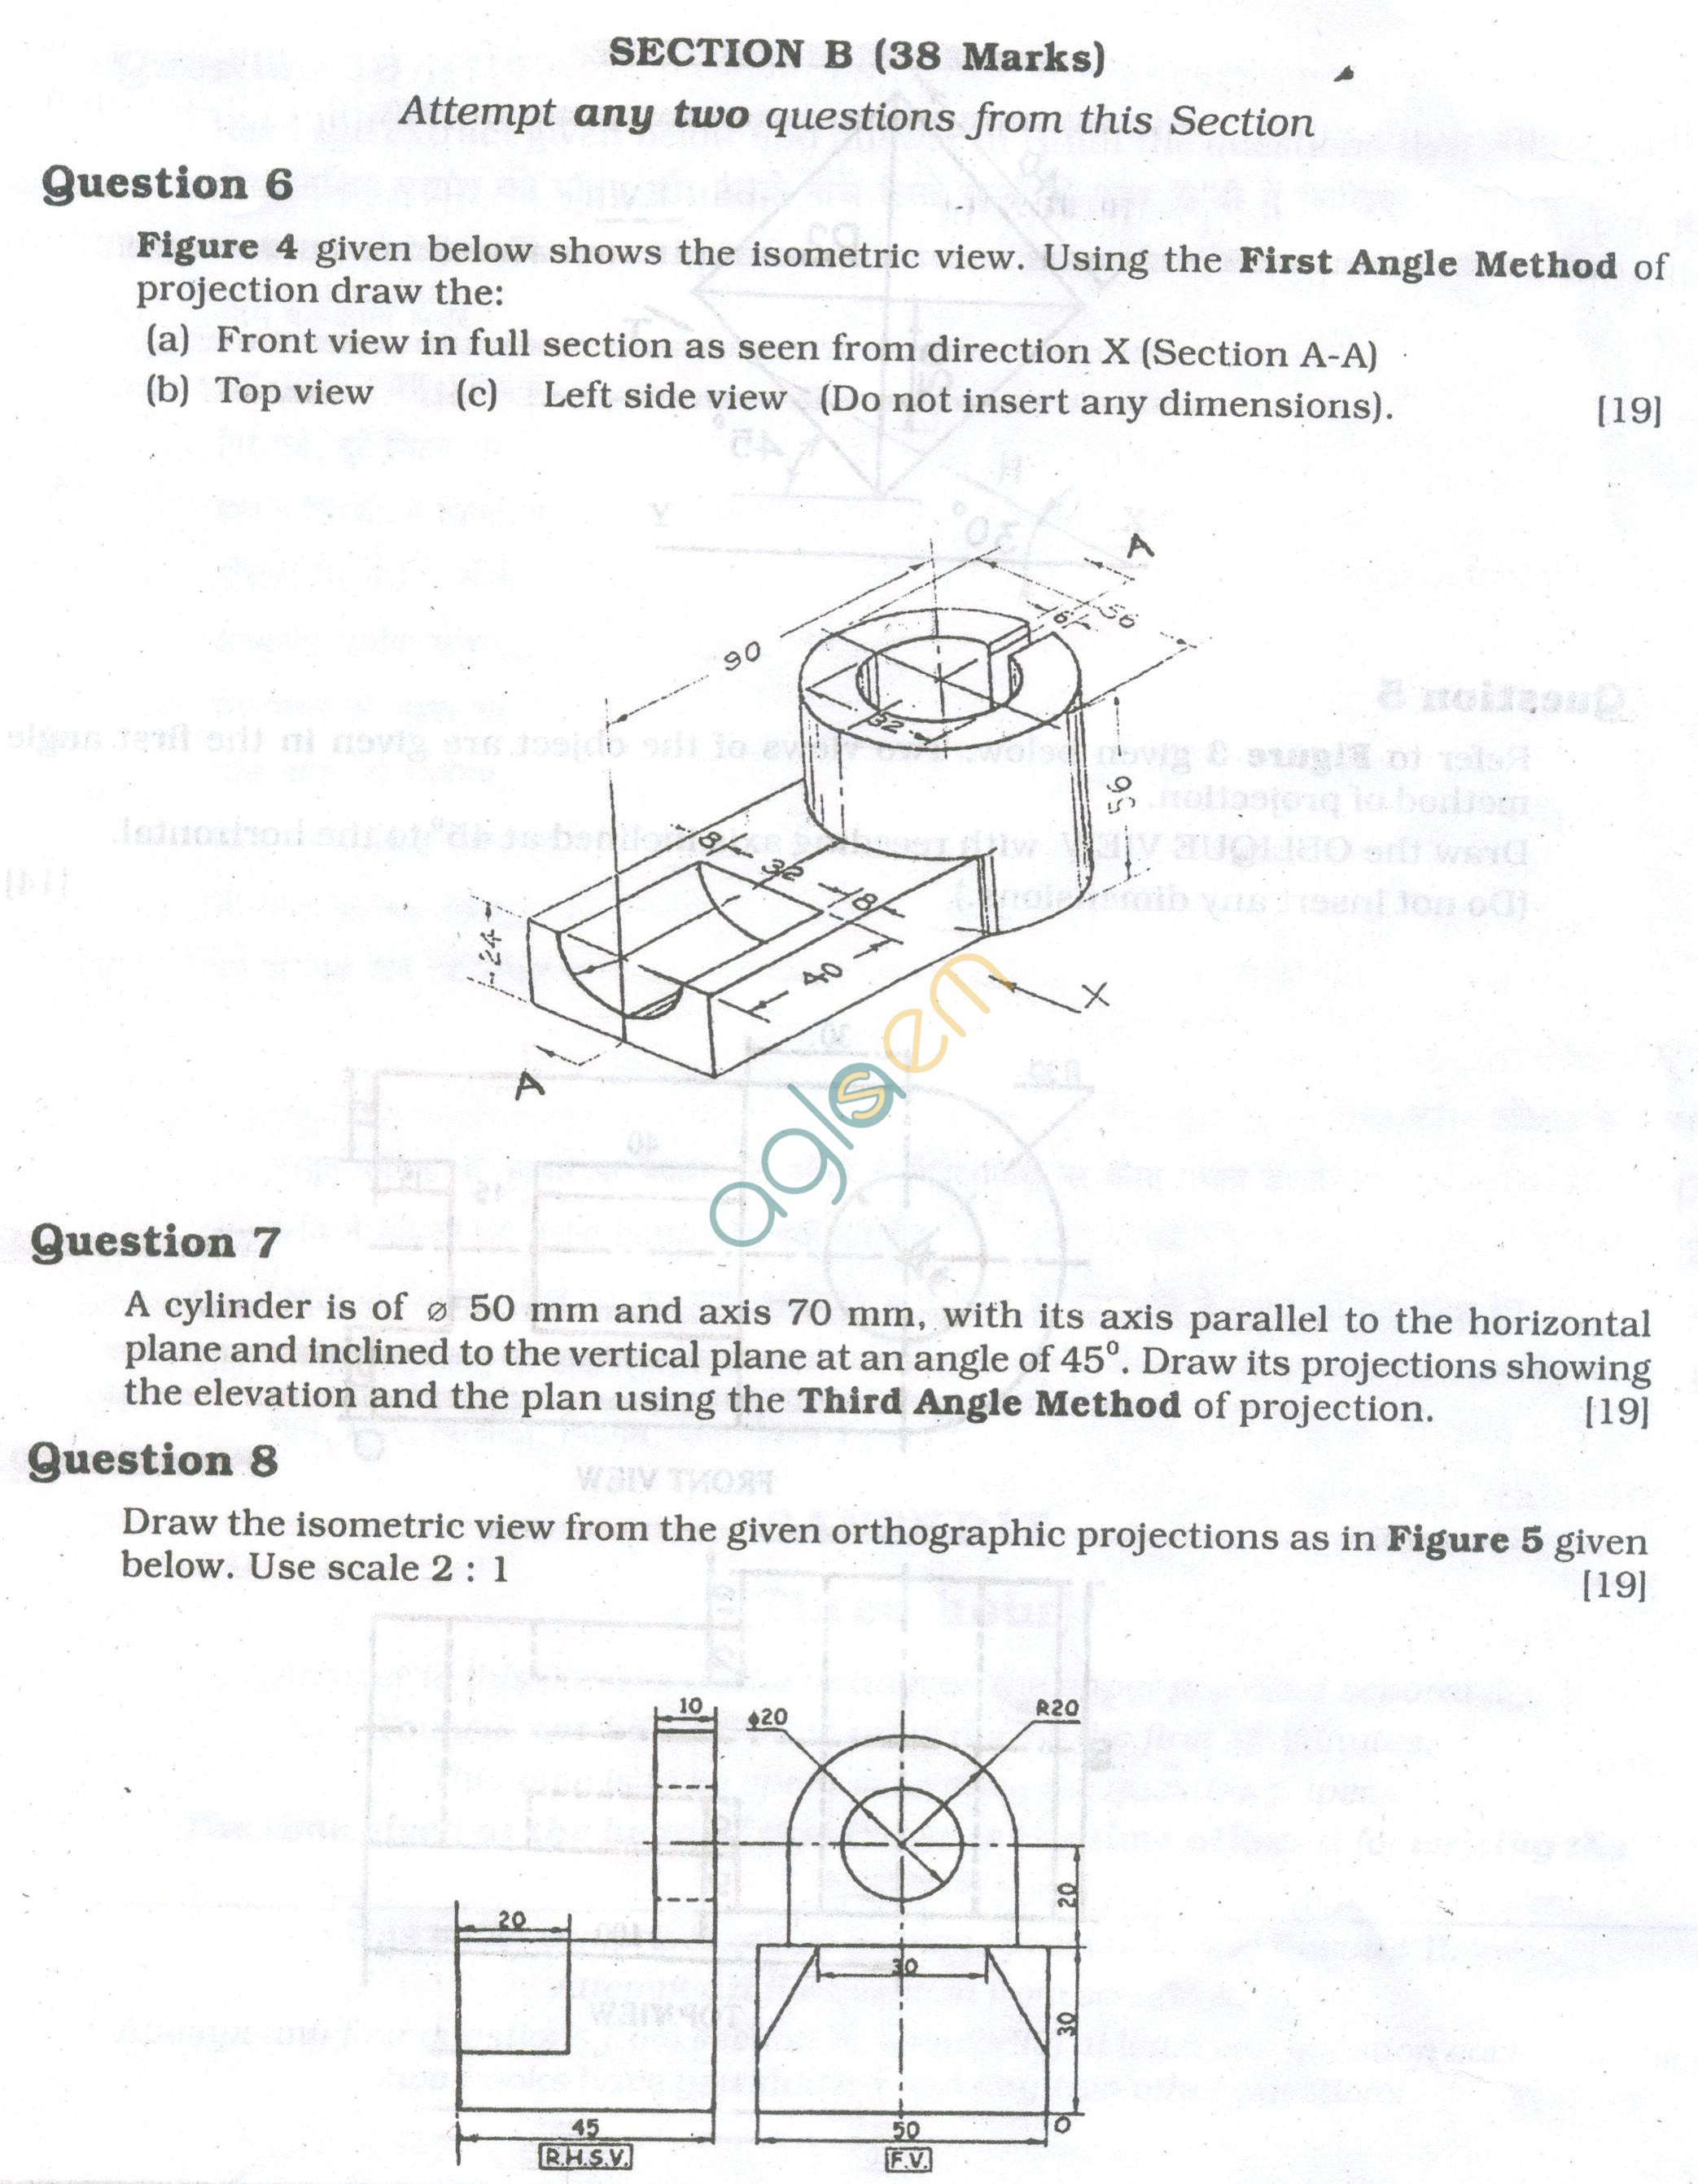 ICSE Question Papers 2013 for Class 10 - Technical Drawing/